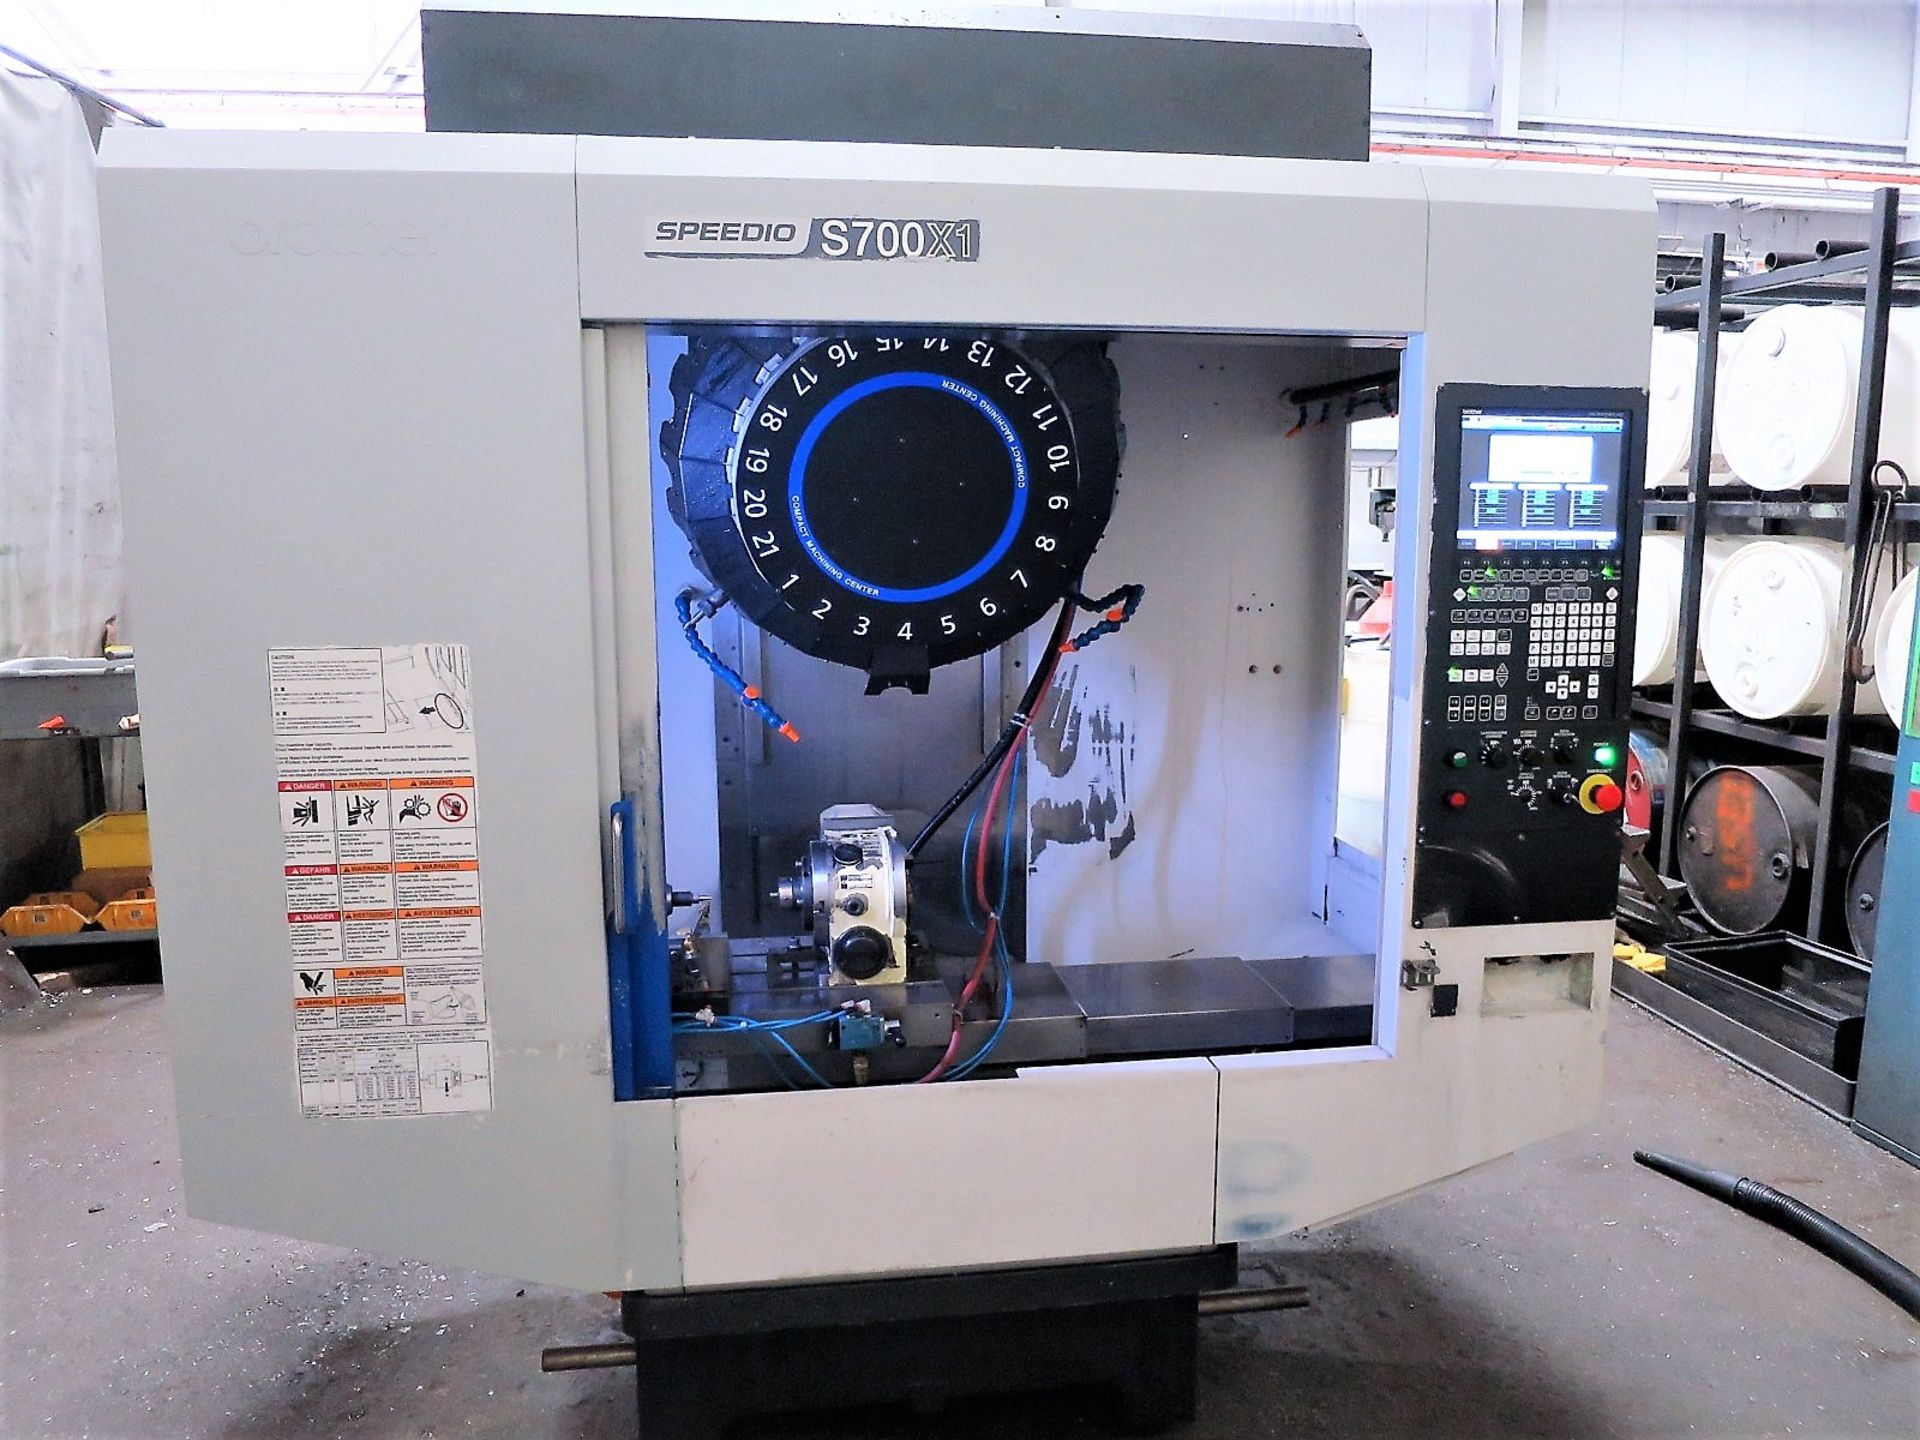 *** SOLD SOLD SOLD*** 2015 Brother Speedio S700X1 4-Axis CNC Drill Tap Vertical Machining Center,